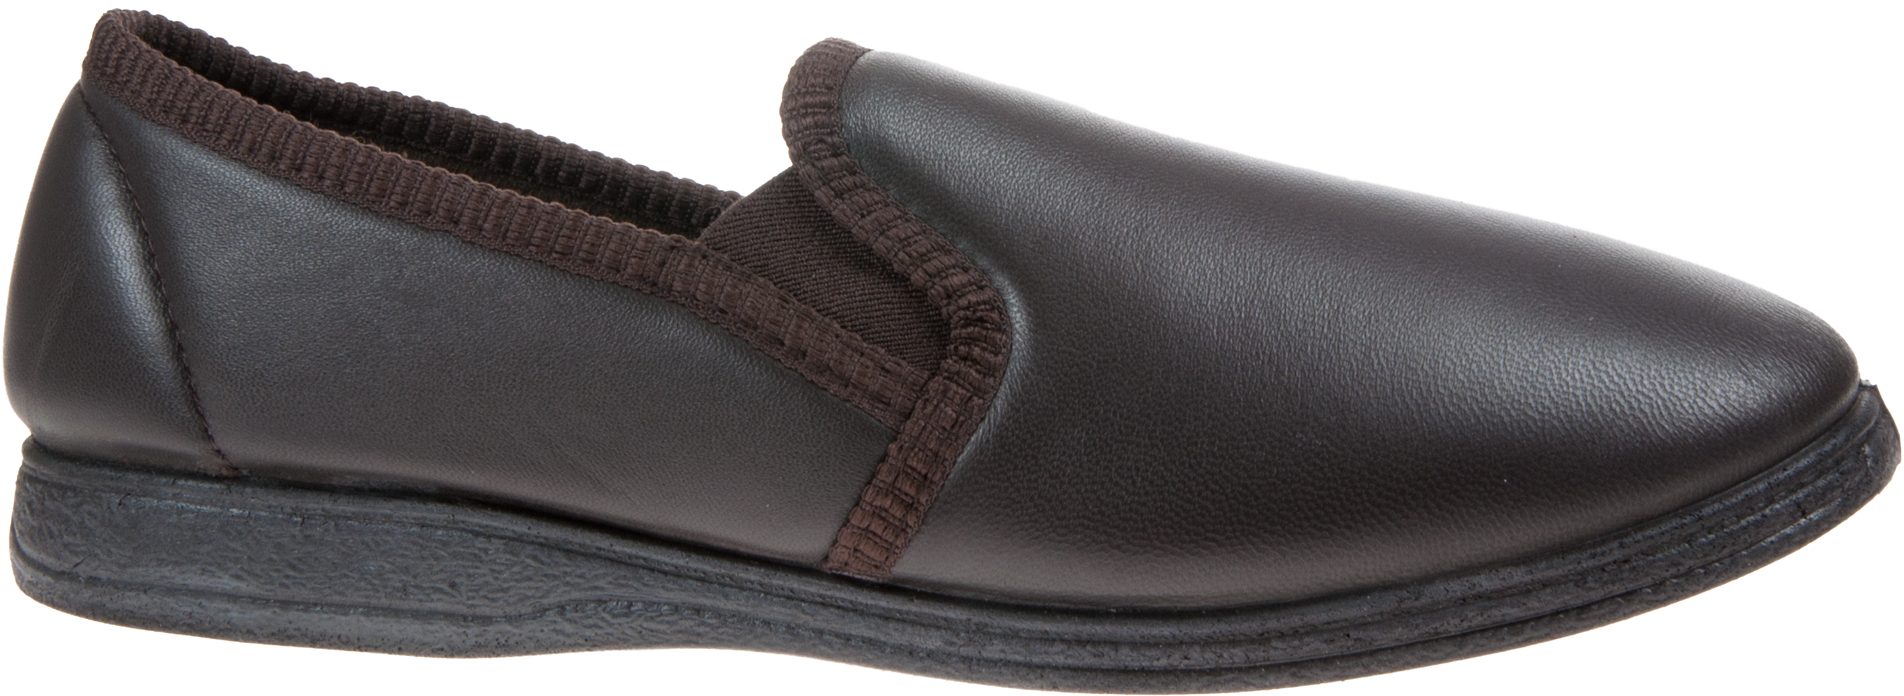 Sleepers Hadley Dark Brown Leather MS414B - Full Slippers - Humphries Shoes